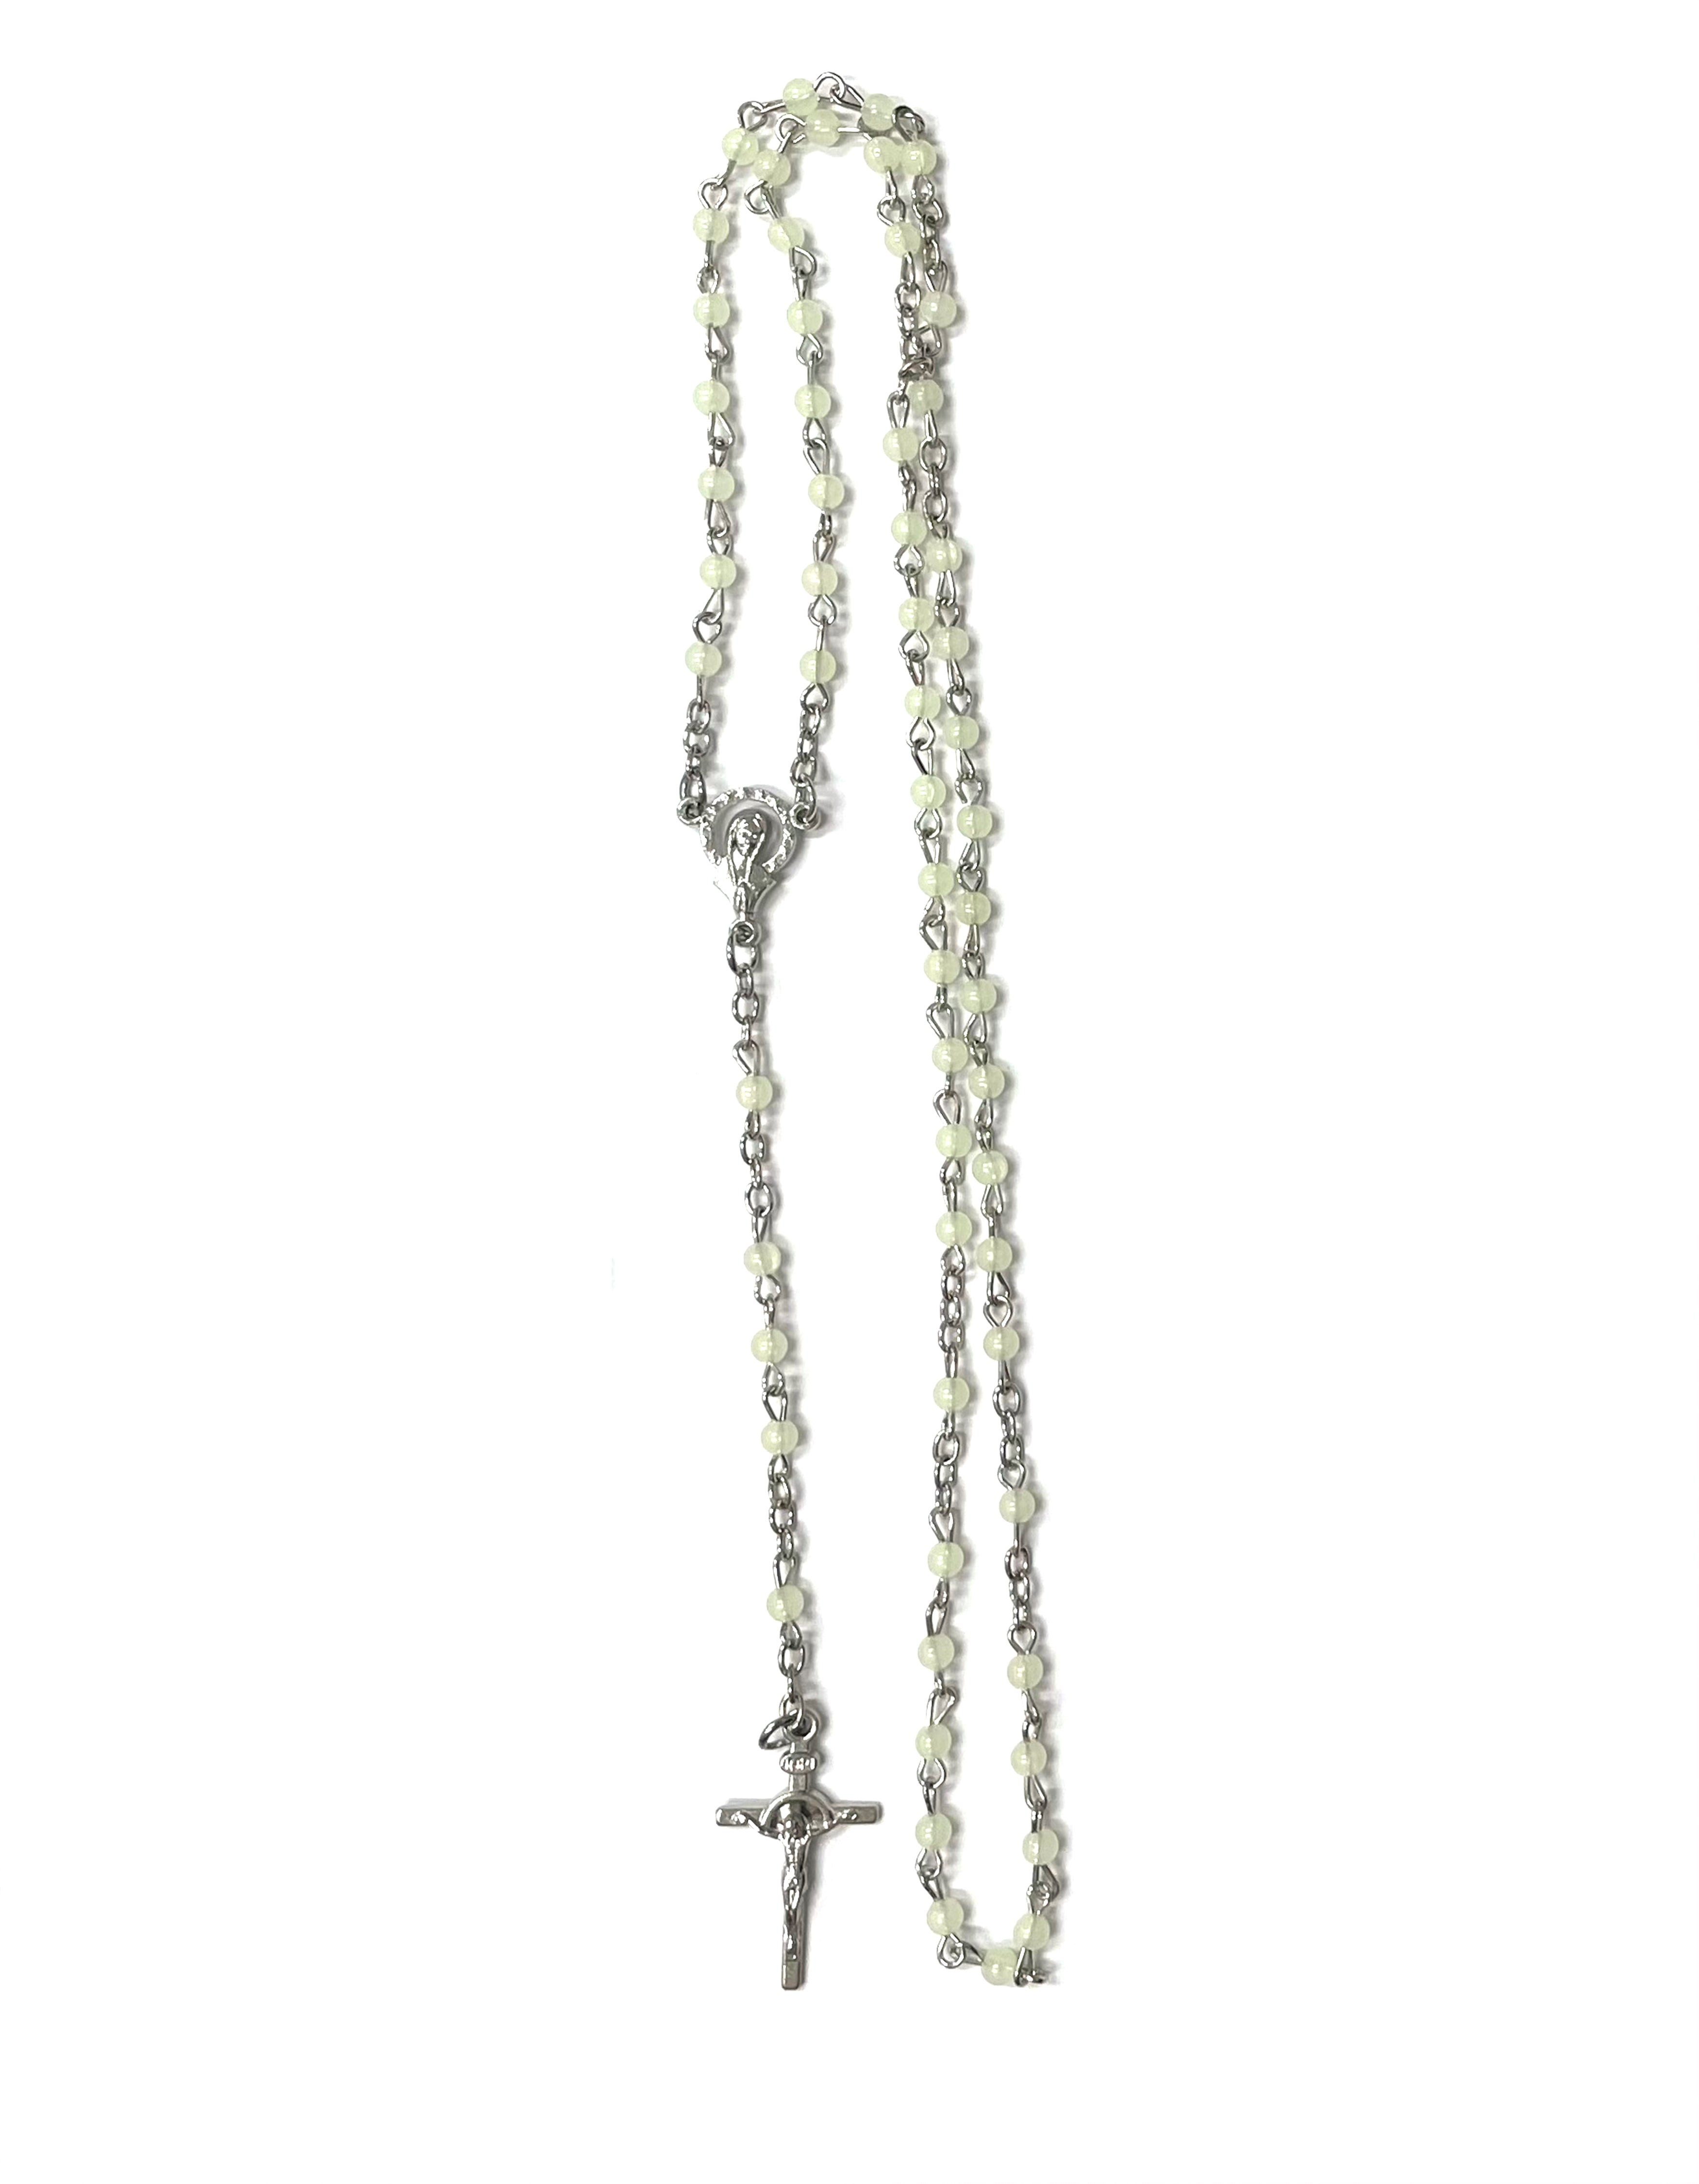 Silvered rosary with colorful plastic beads